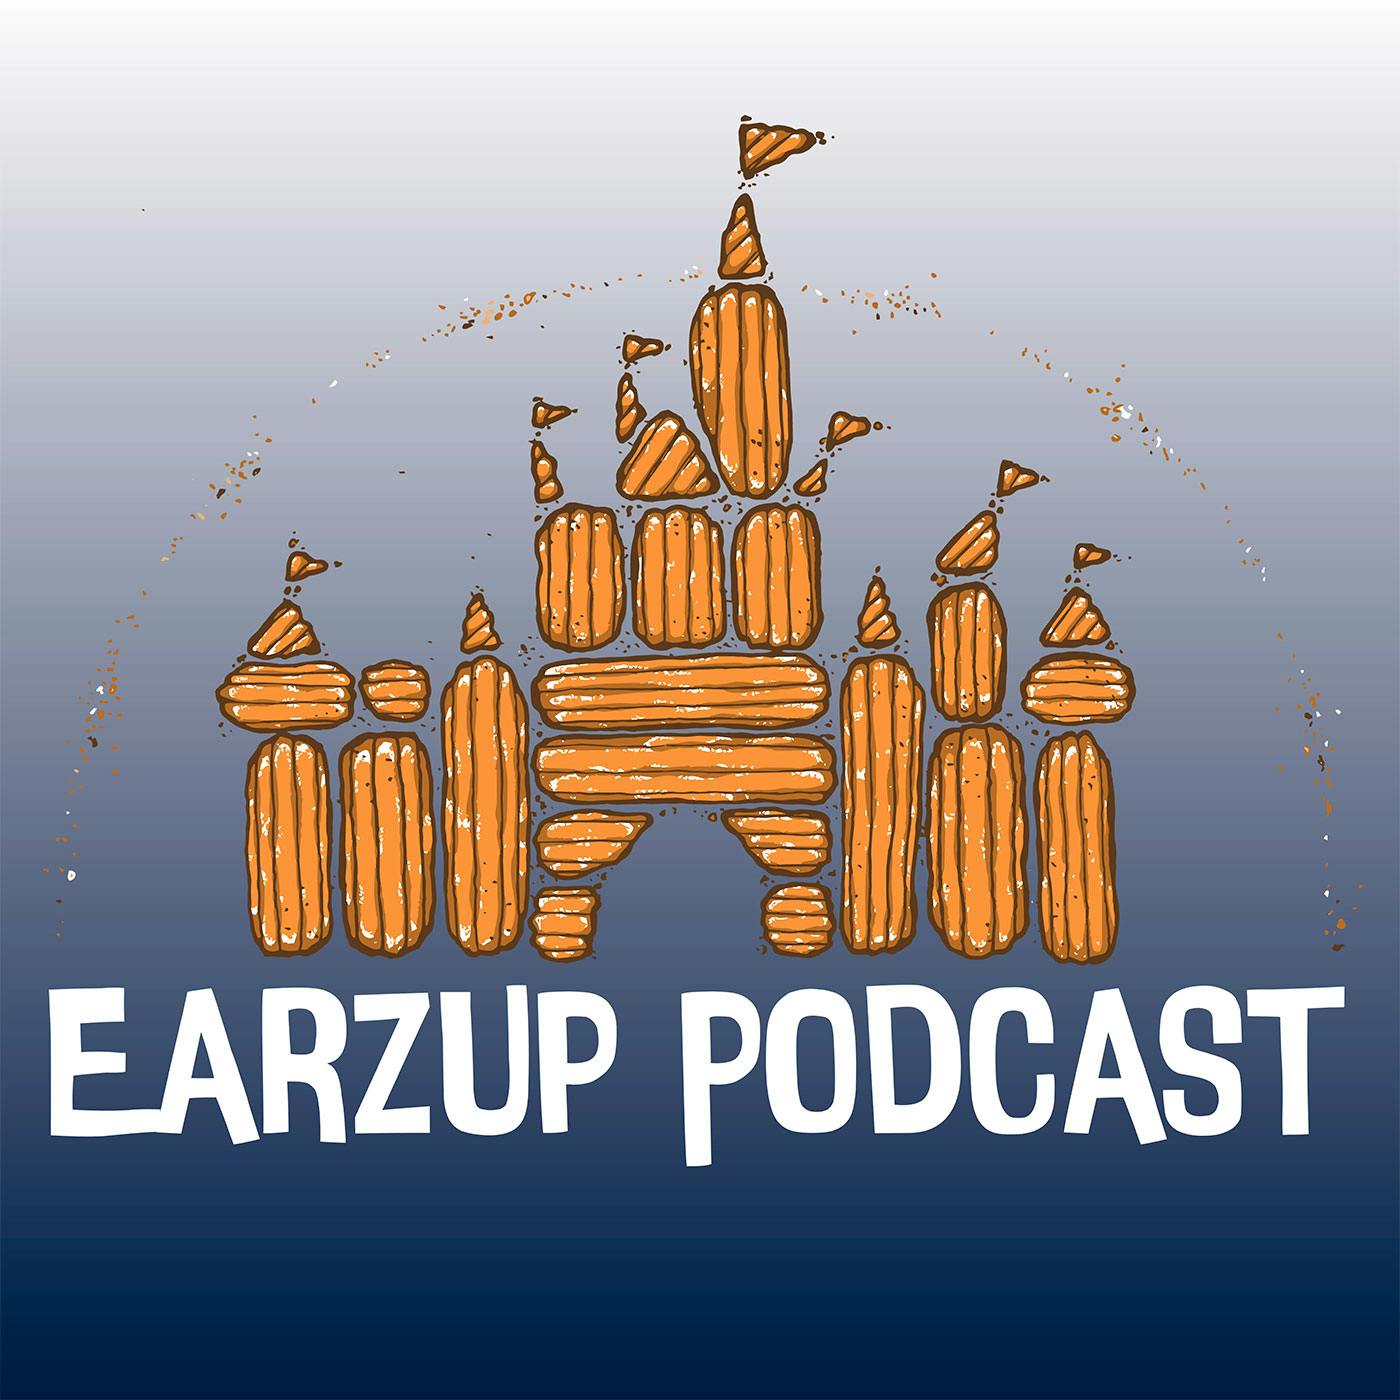 EarzUp! | The History of Cars Land